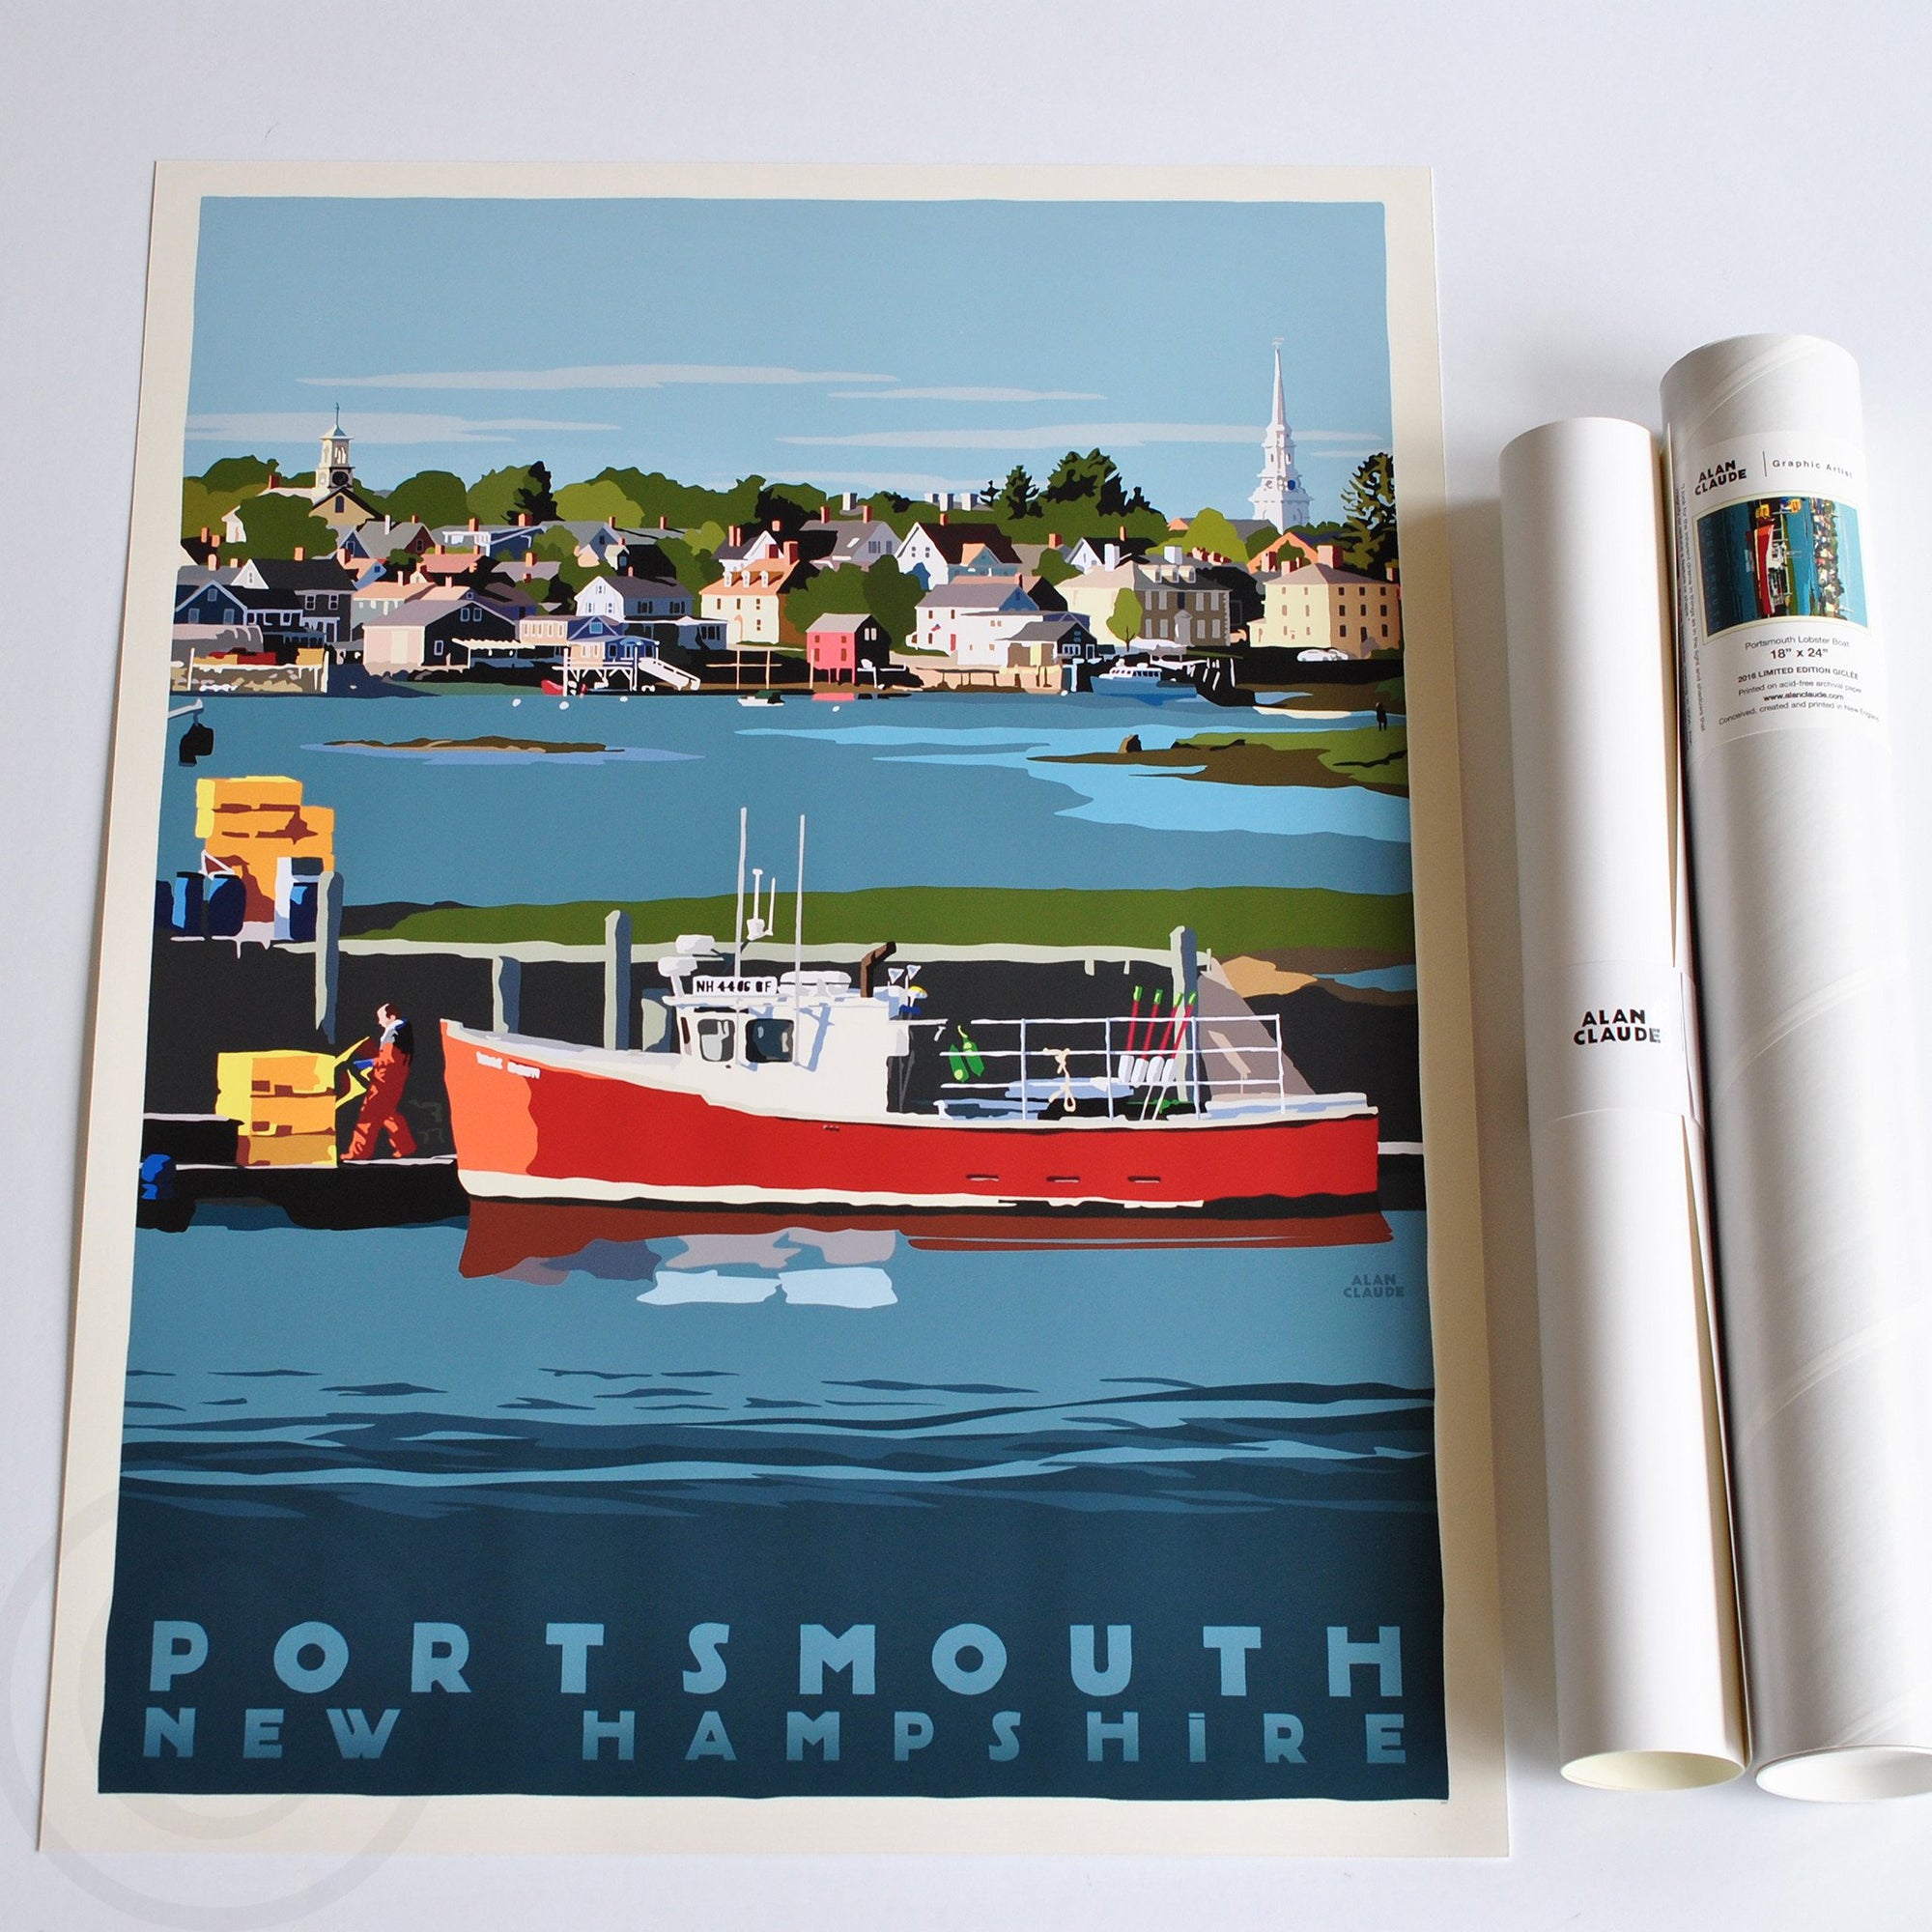 Portsmouth Lobster Boat Art Print 18" x 24" Travel Poster By Alan Claude - New Hampshire